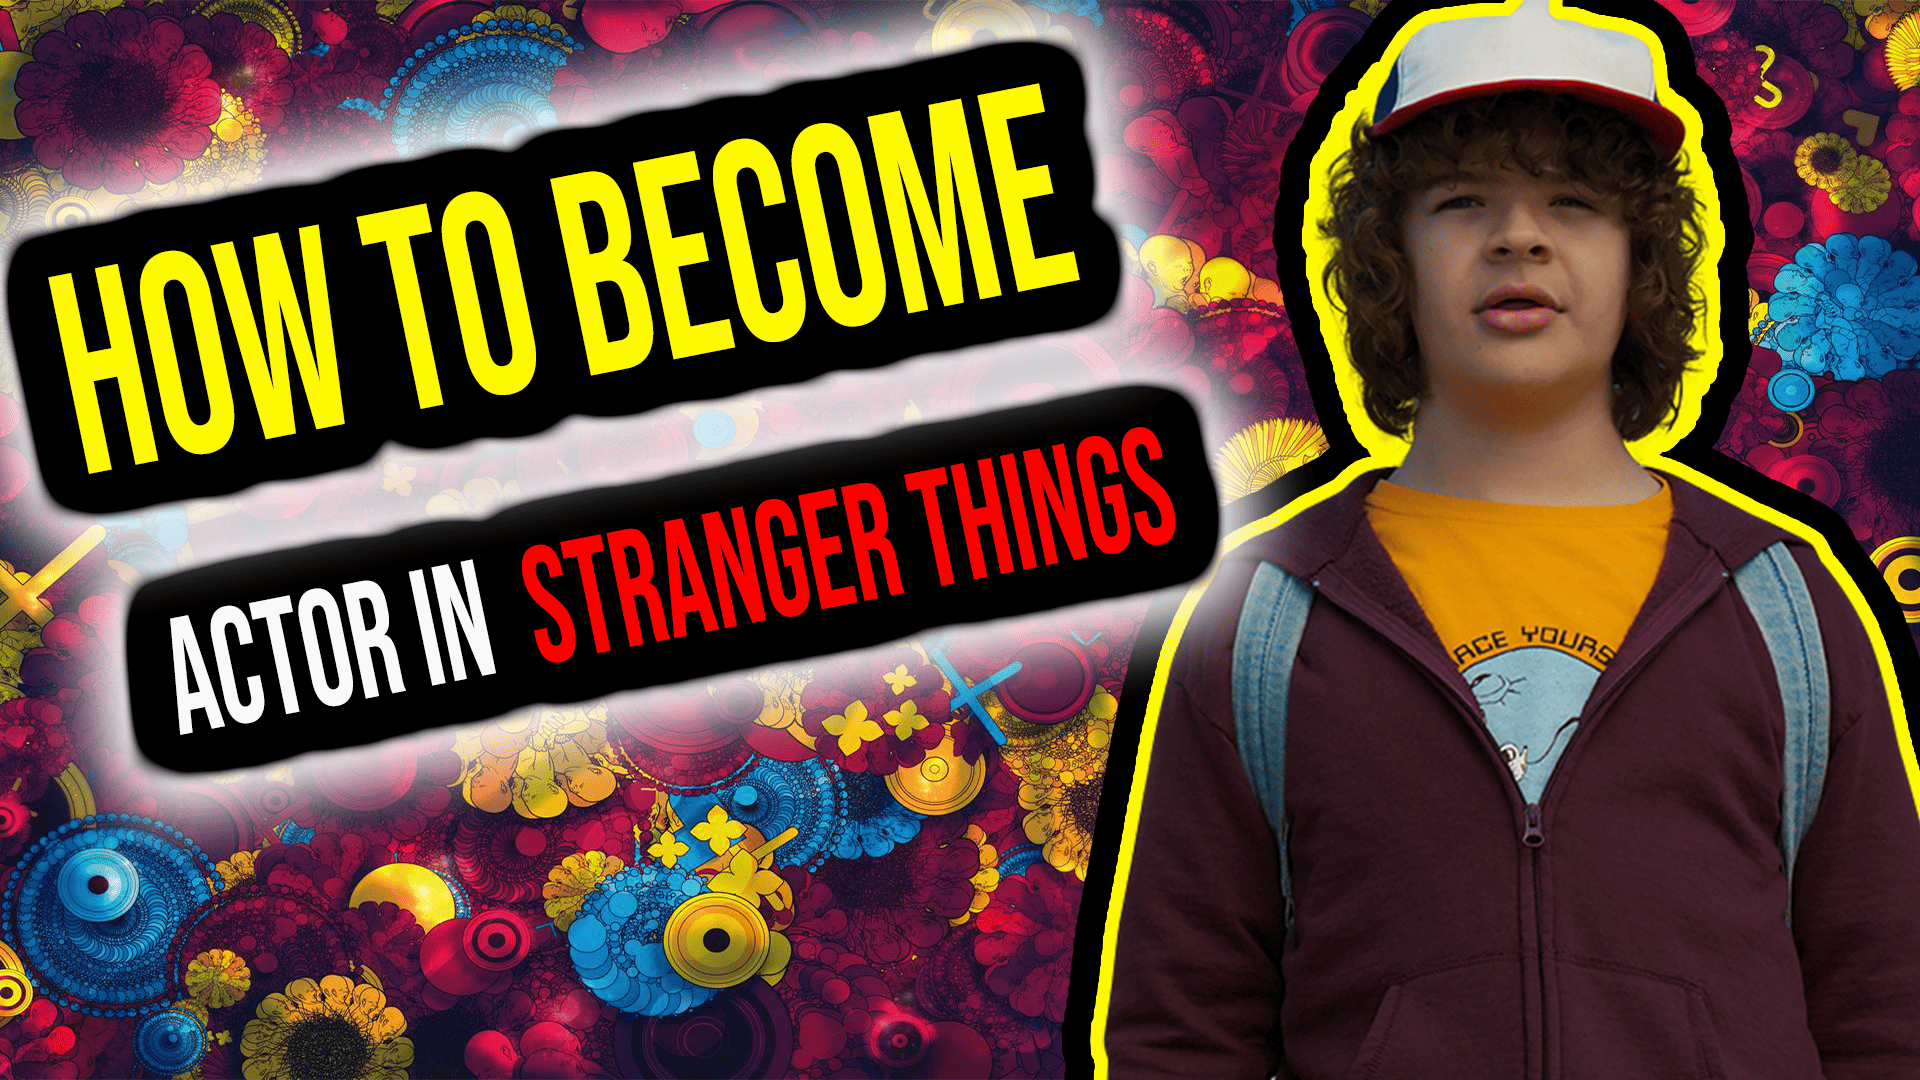 How To Be An Actor On ‘Stranger Things’: Your Step-by-Step Guide